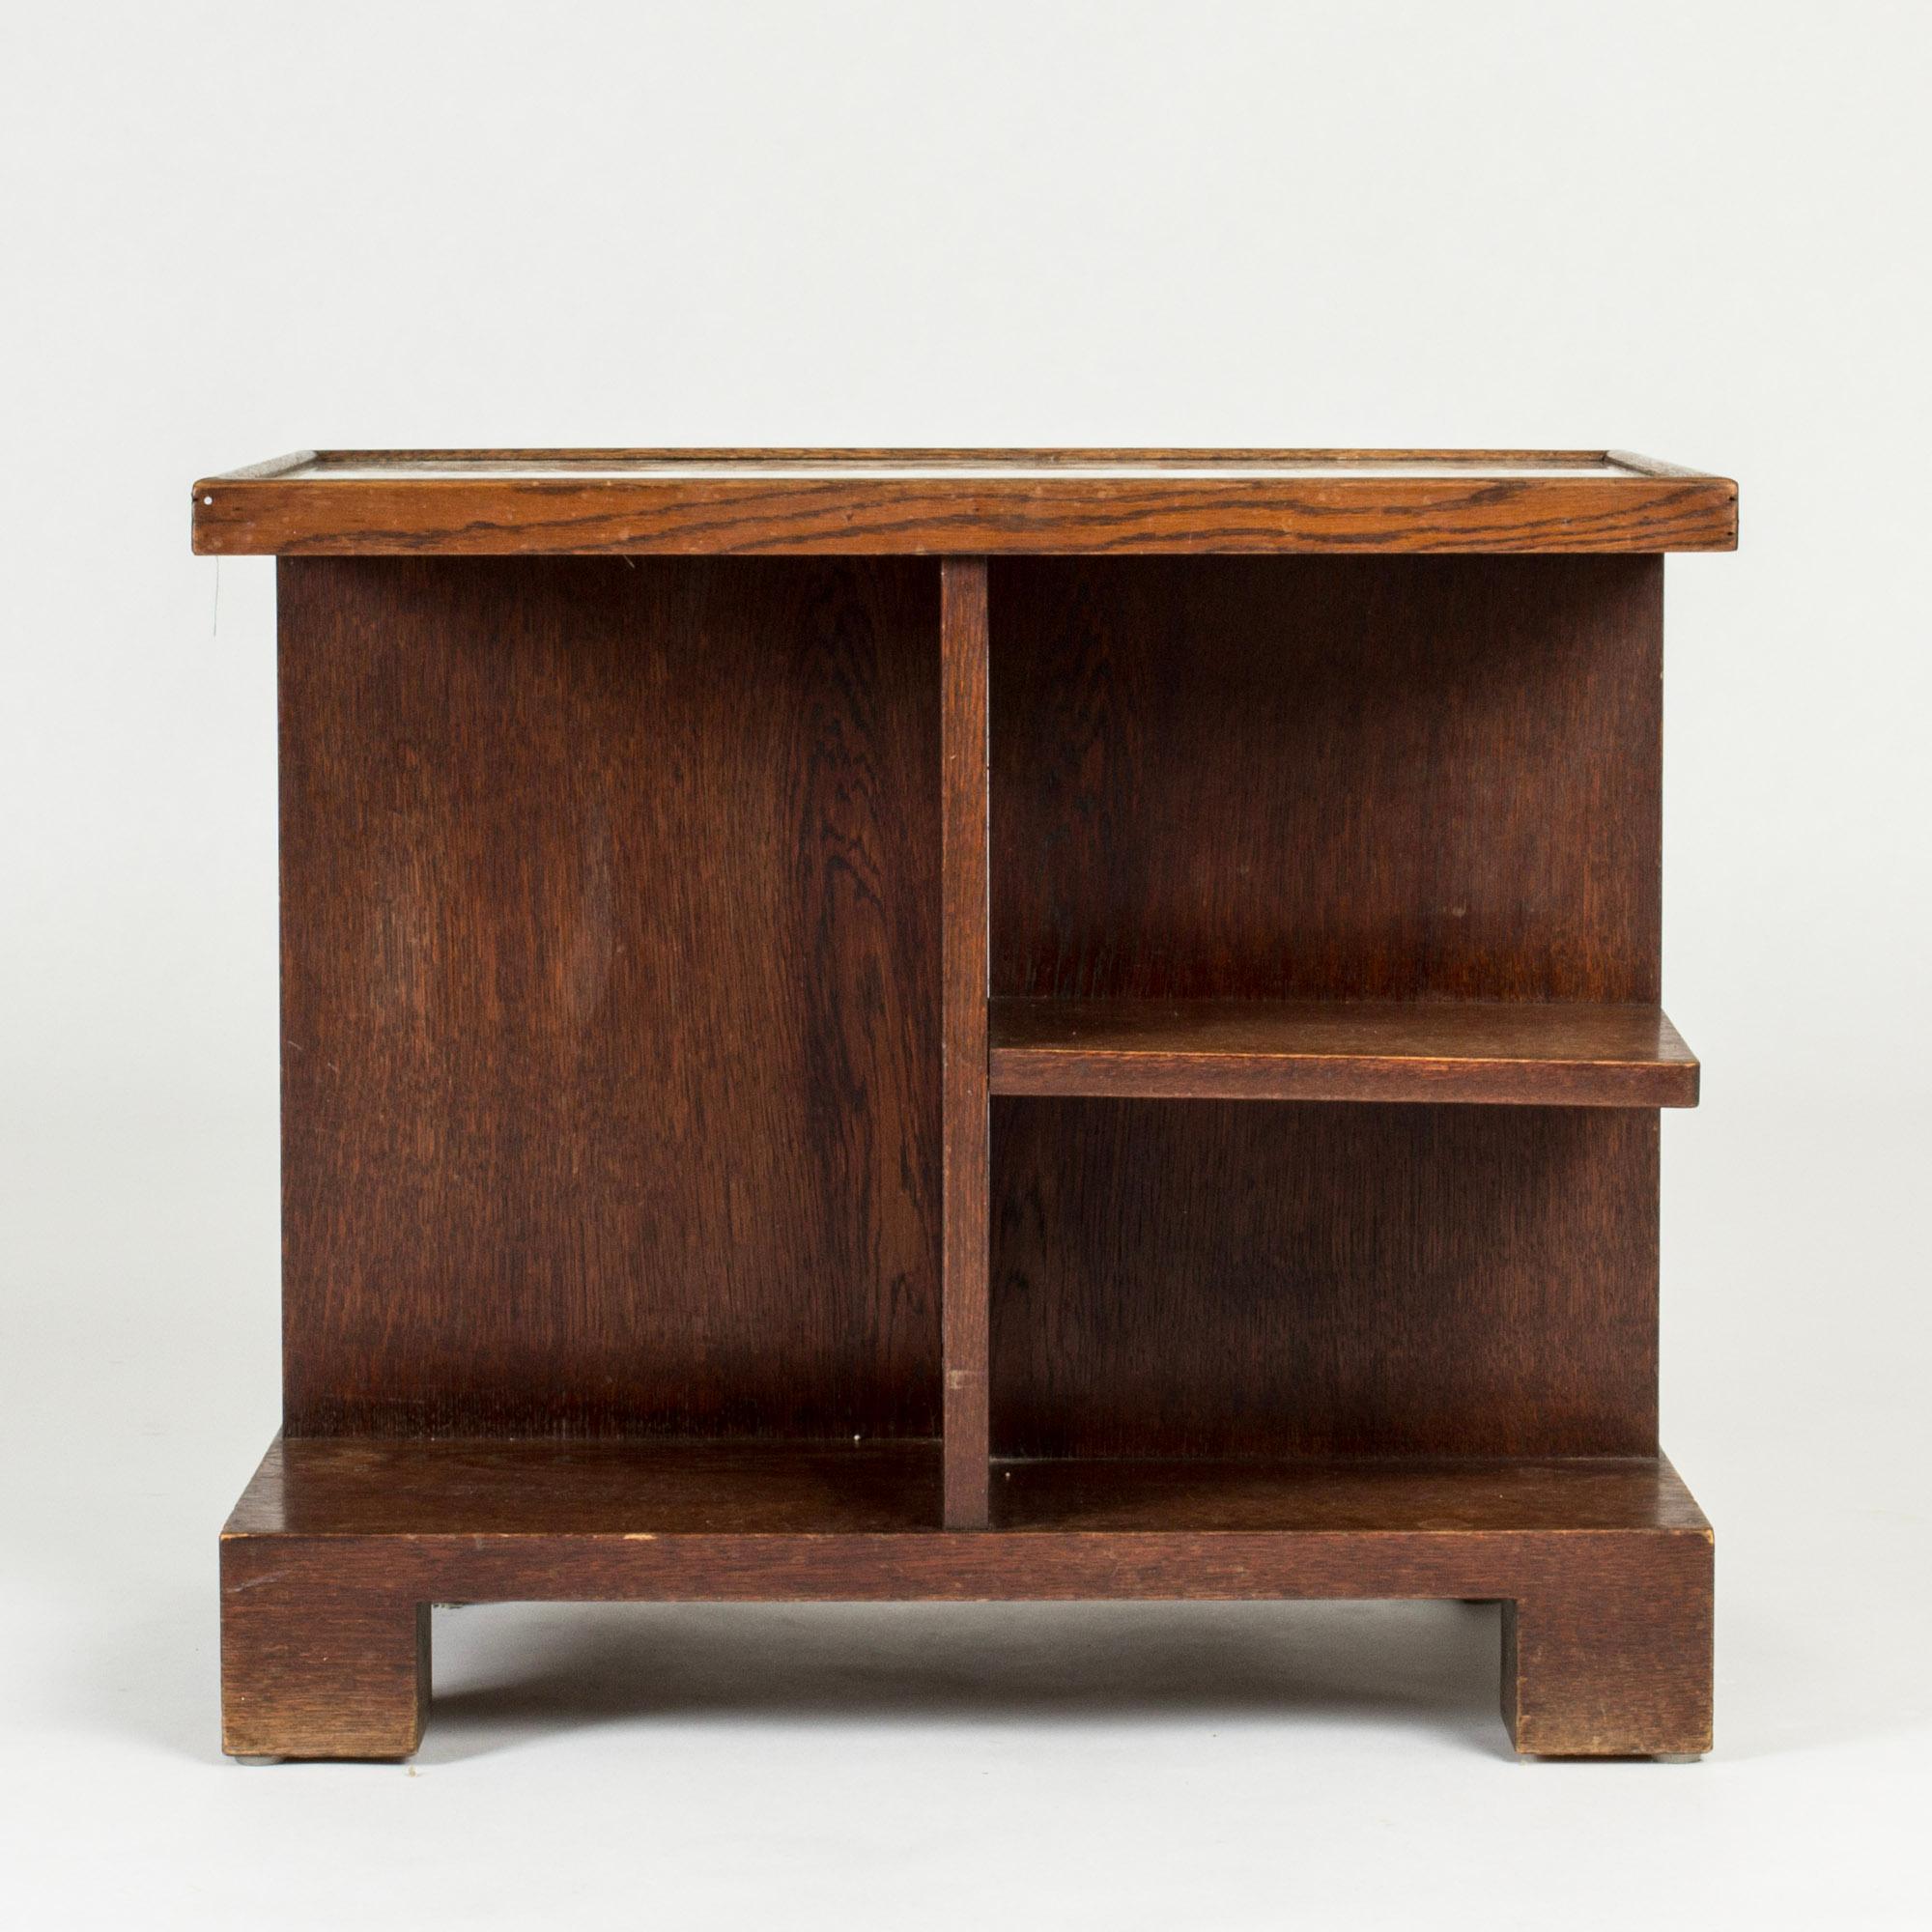 Striking functionalist console table by Axel Larsson, made from stained wood with shelves under the table top. Copper top underneath a glass sheet. This model was so that the owner’s could insert their own fabric, photos, travel memories and the